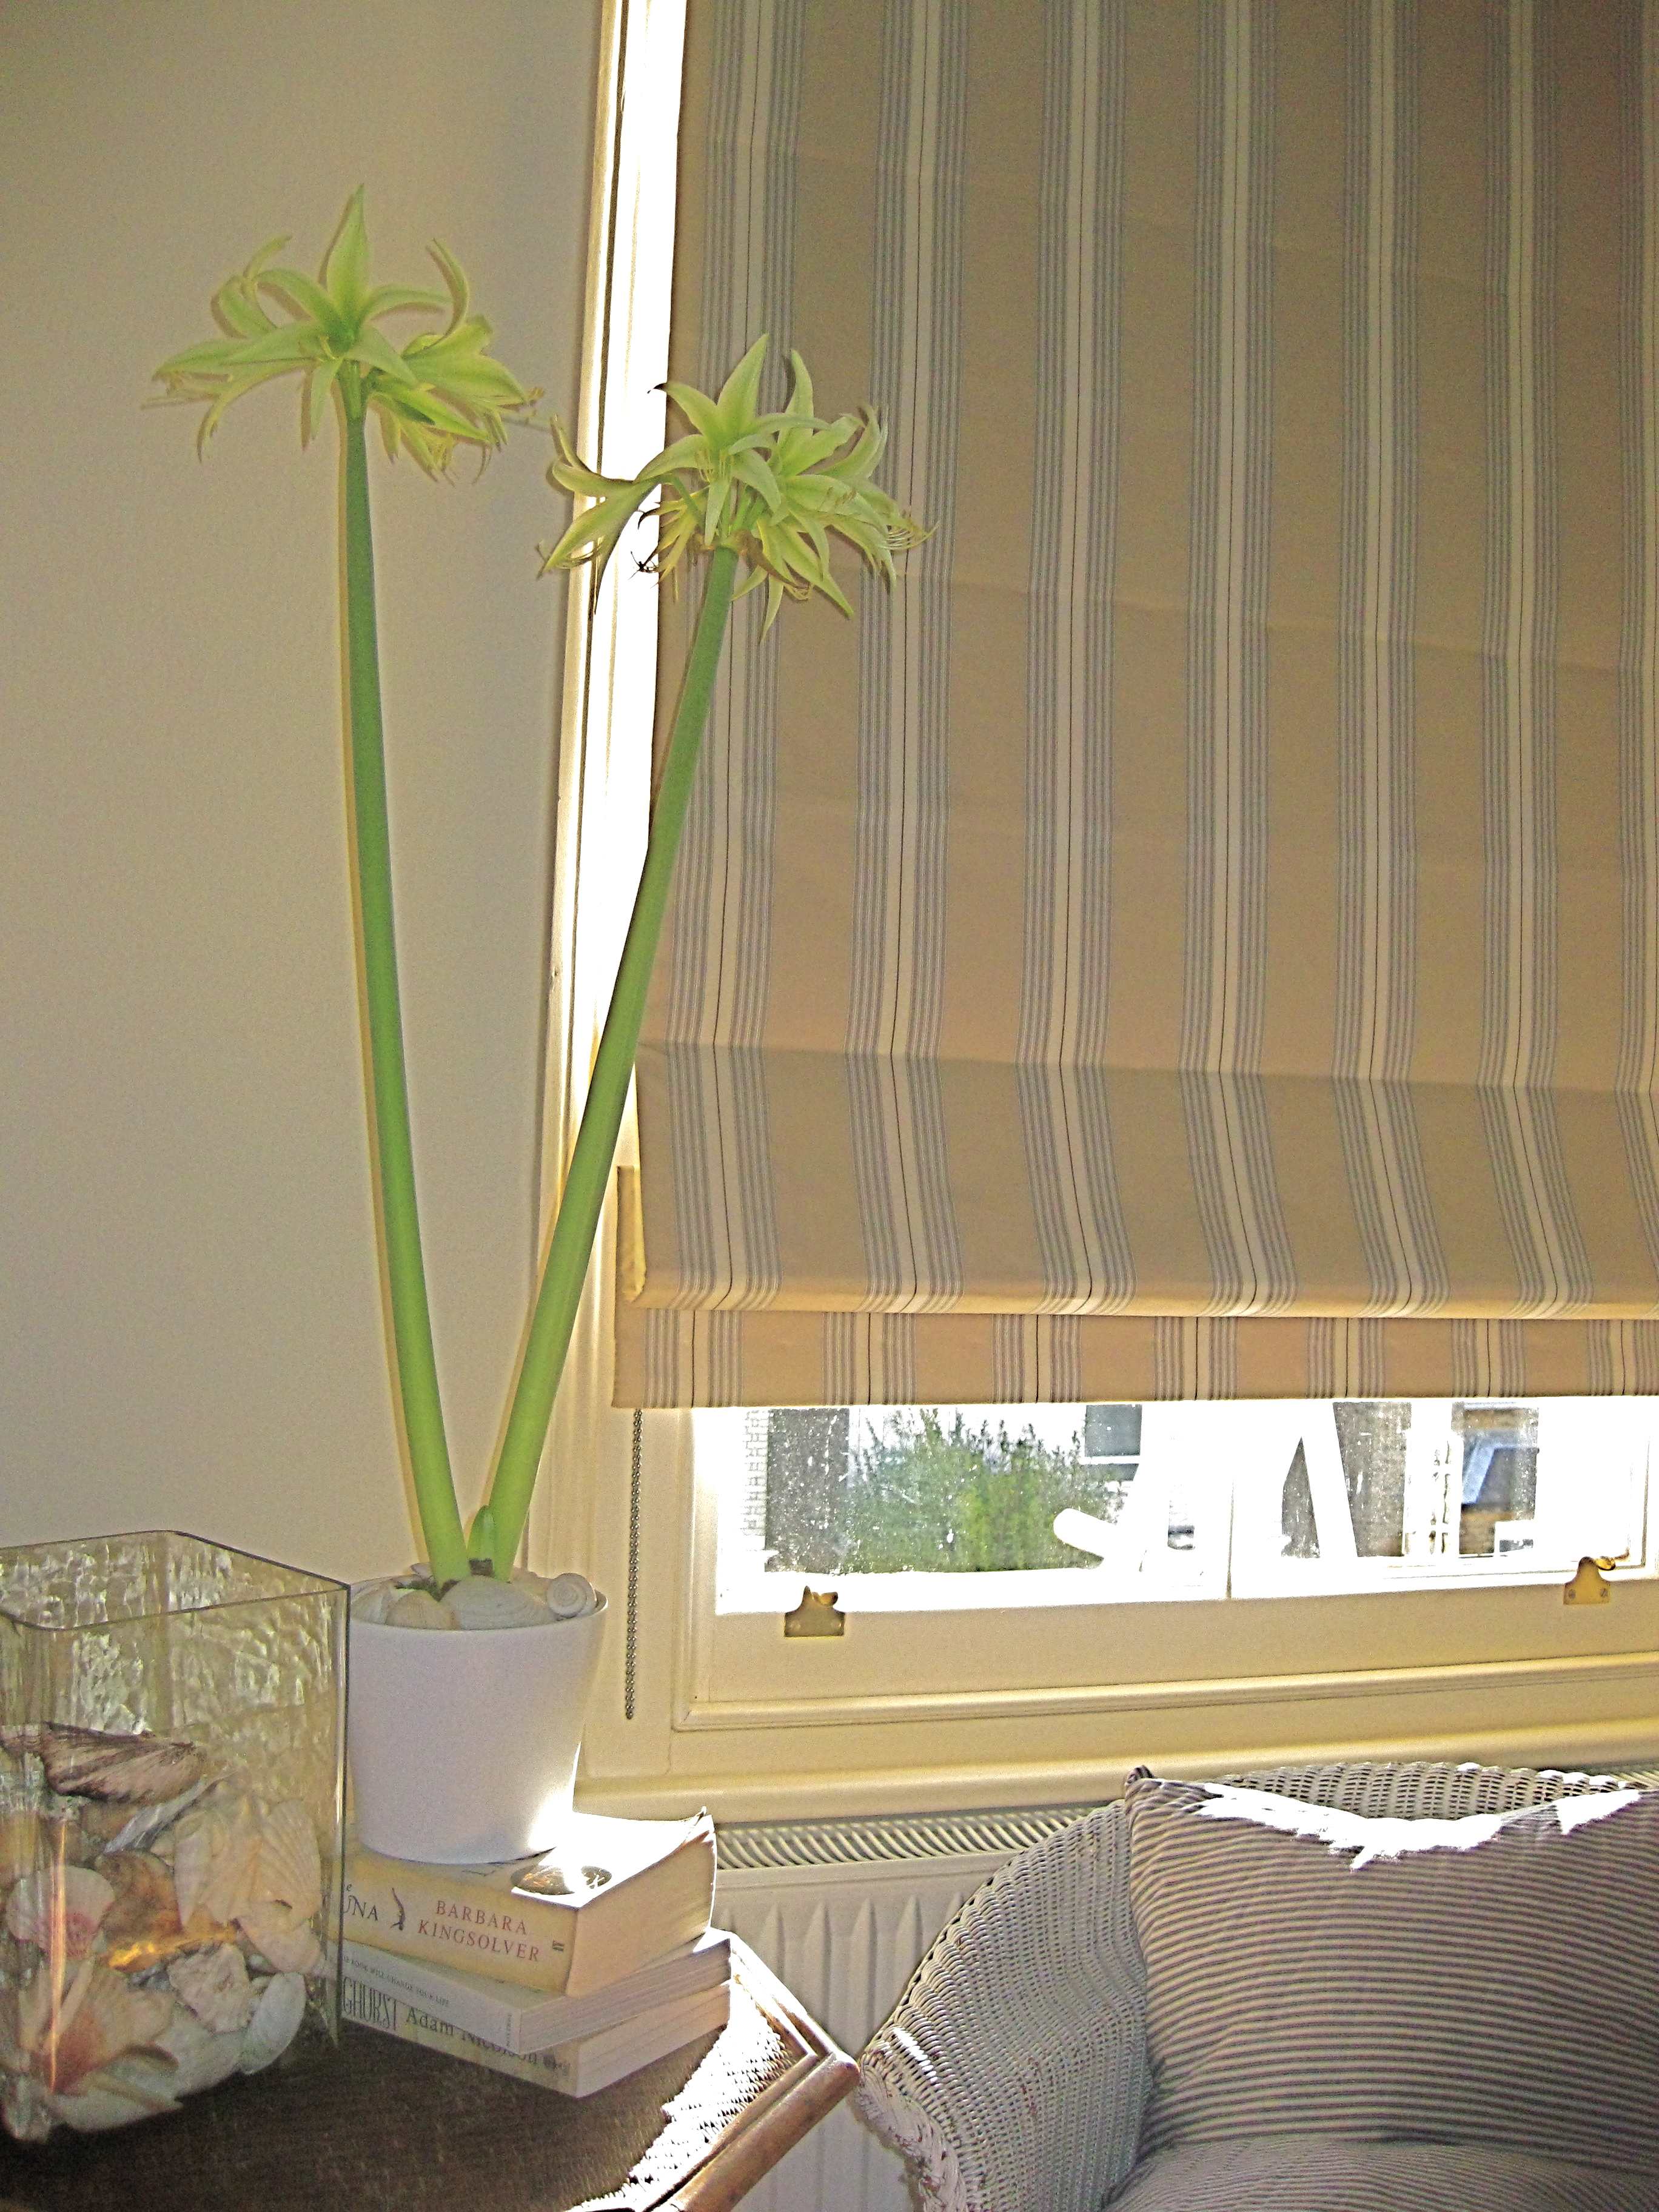 Blinds And Curtains Grasscloth Wallpaper